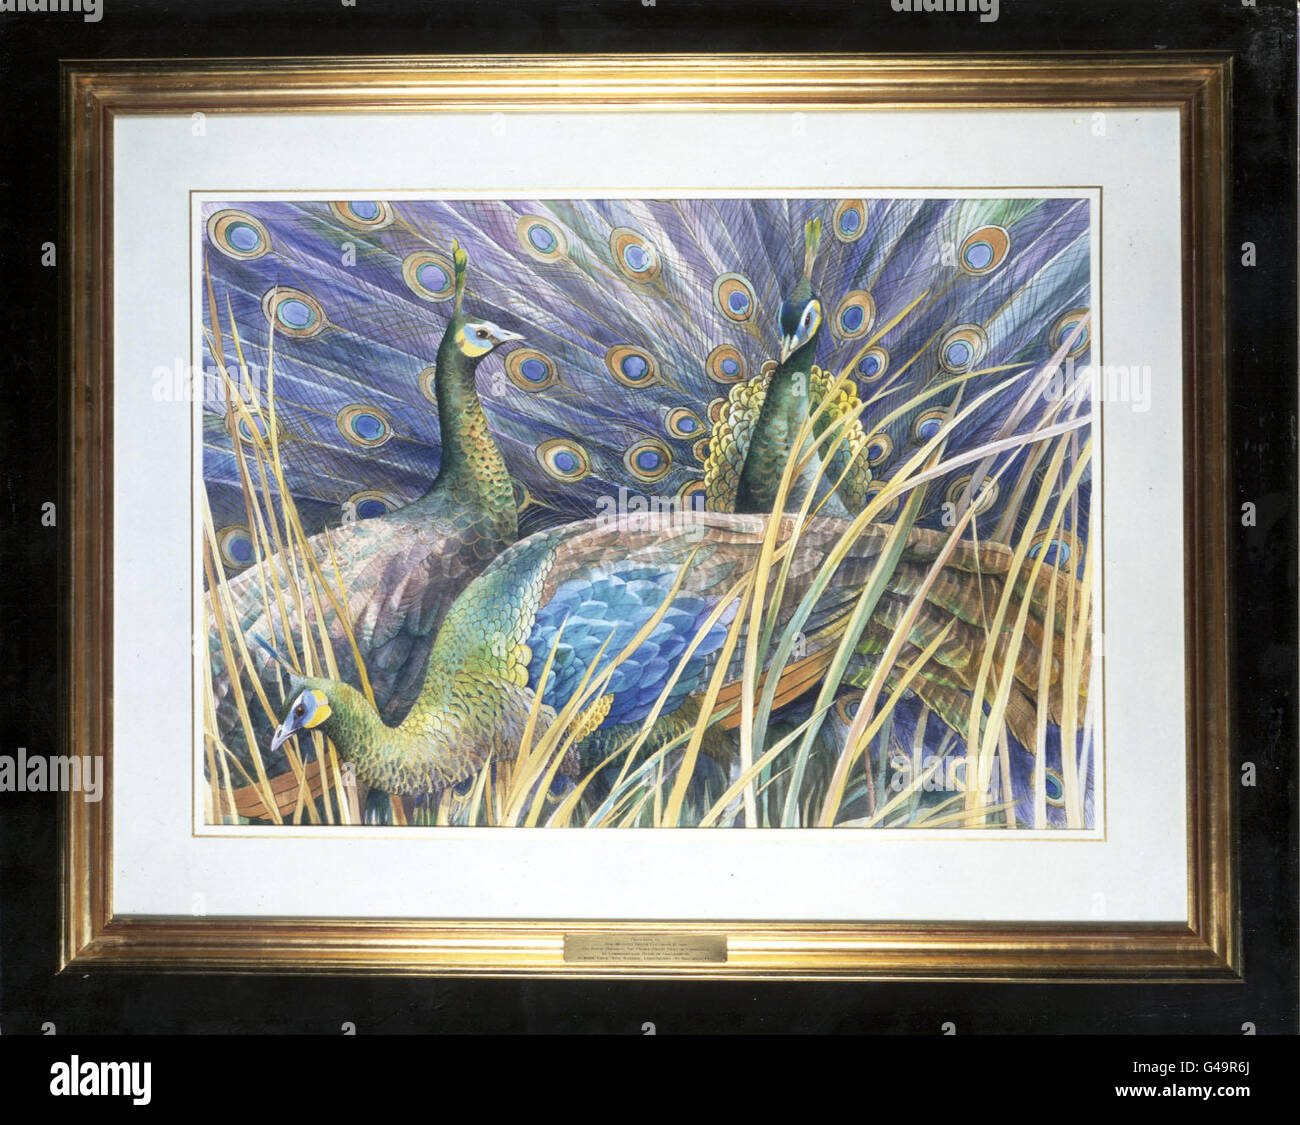 Green Peacocks (PavoMuticus). One of two paintings of endangered bird species by British artist Emma Foulls being presented to The Queen and The Duke Of Edinburgh by Commonwealth Leaders meeting in Edinburgh this evening. Stock Photo